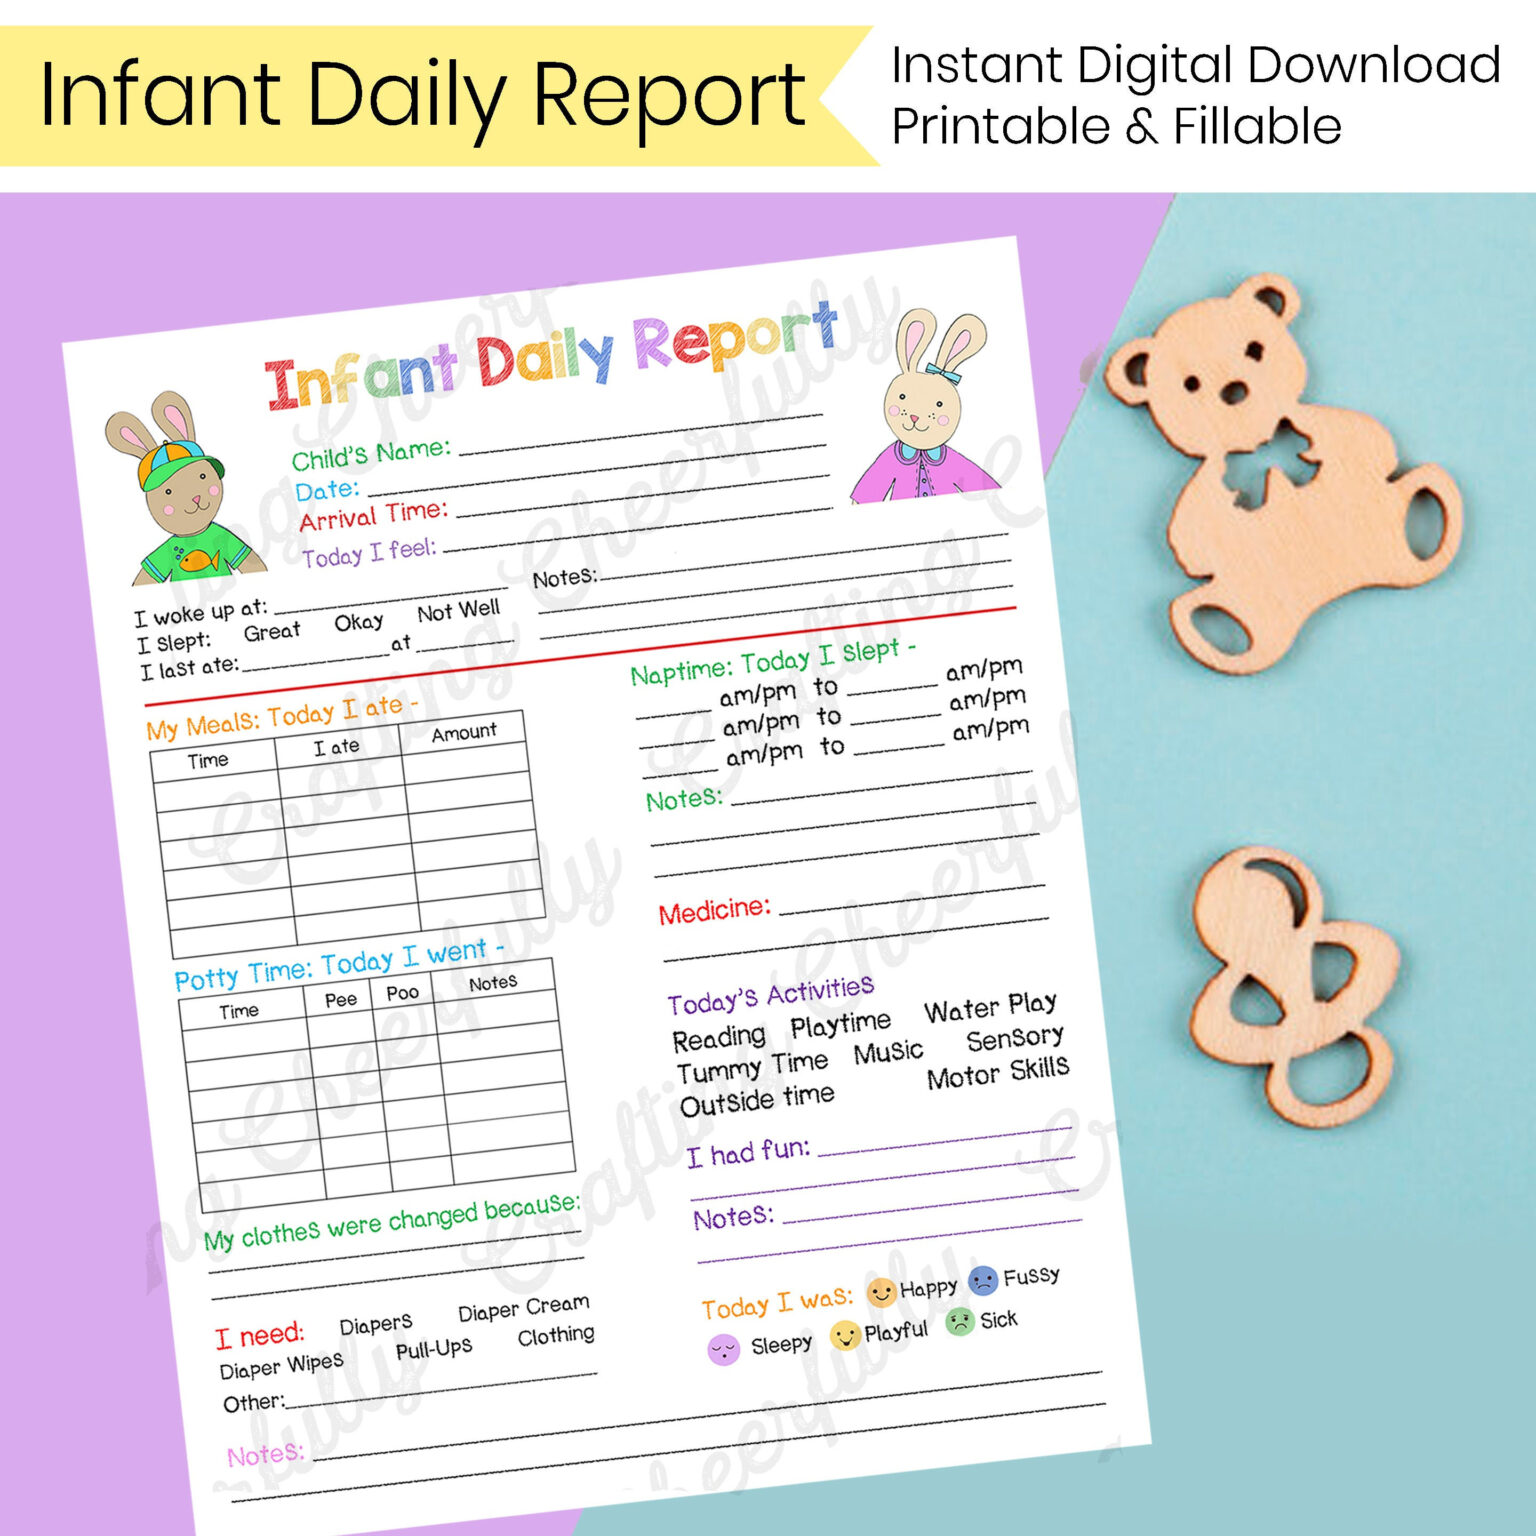 infant-daily-report-in-home-preschool-daycare-nanny-log-for-daycare-infant-daily-report